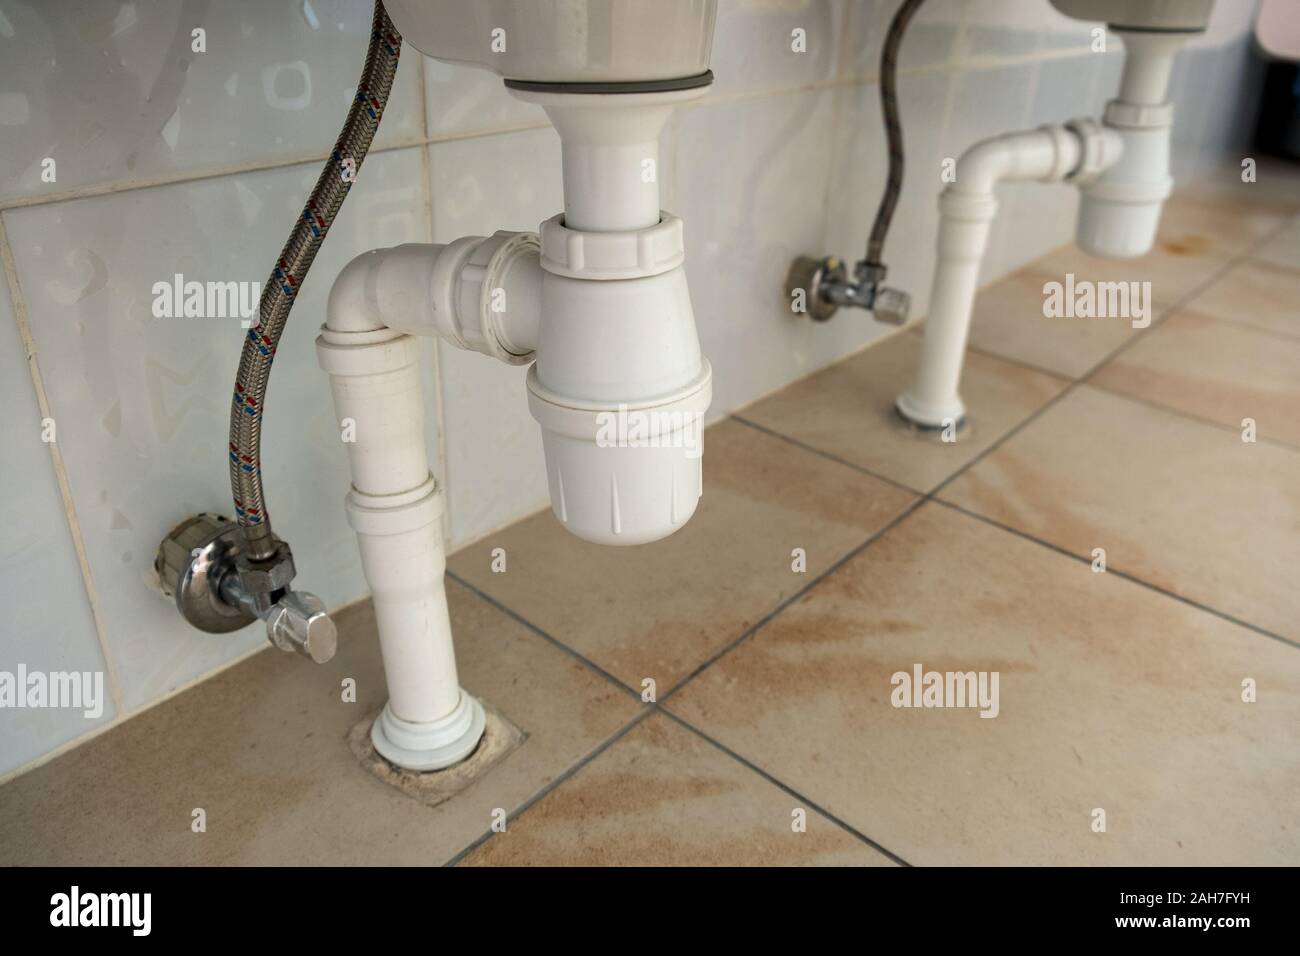 Close Up Of White Plastic Pipe Drain Under Washing Sink In Bathroom Stock Photo Alamy